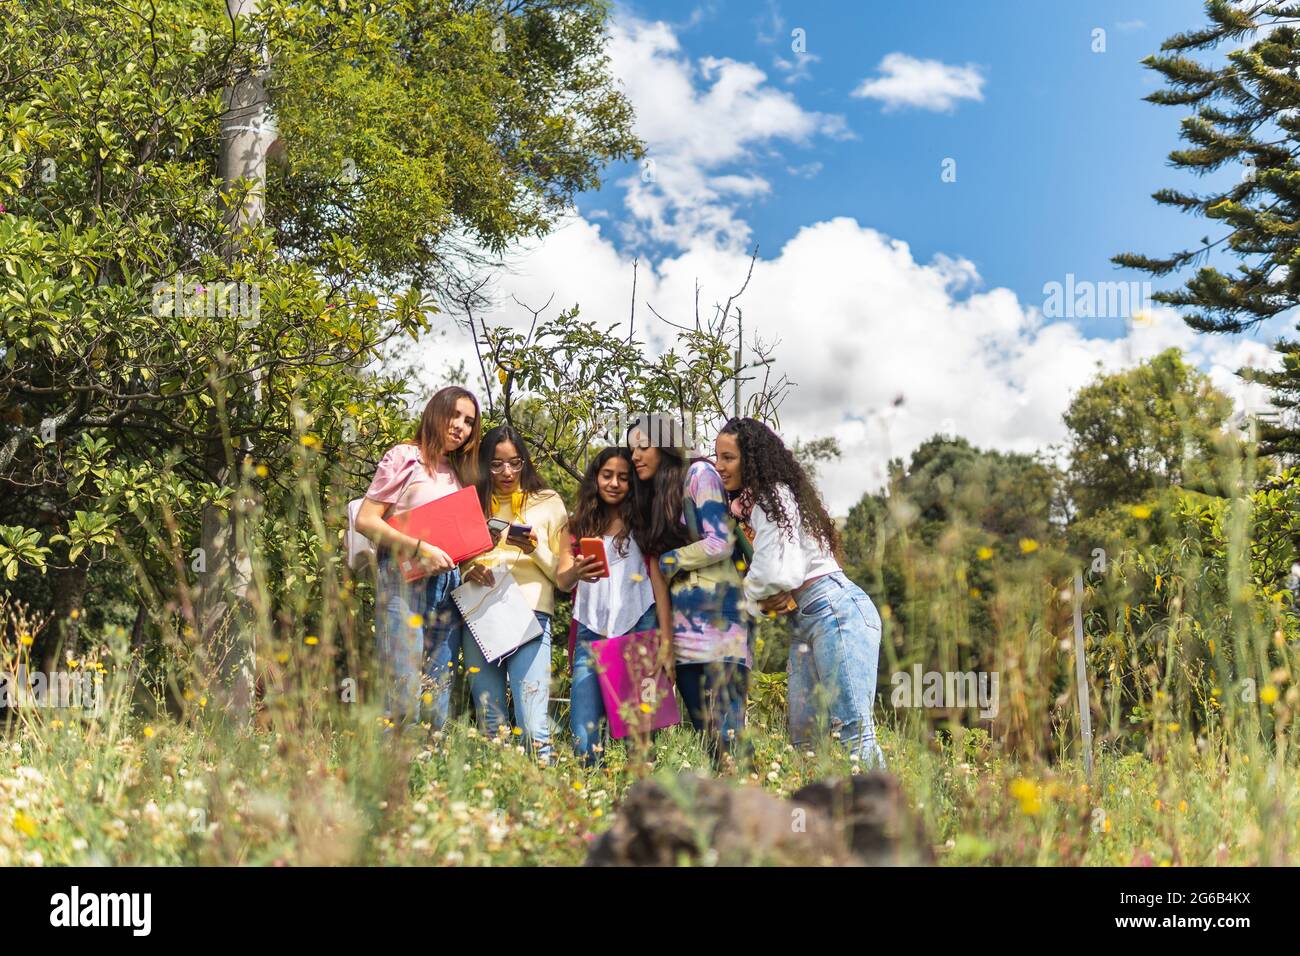 group of latin teen girls students in a flower field checking a cell phone Stock Photo